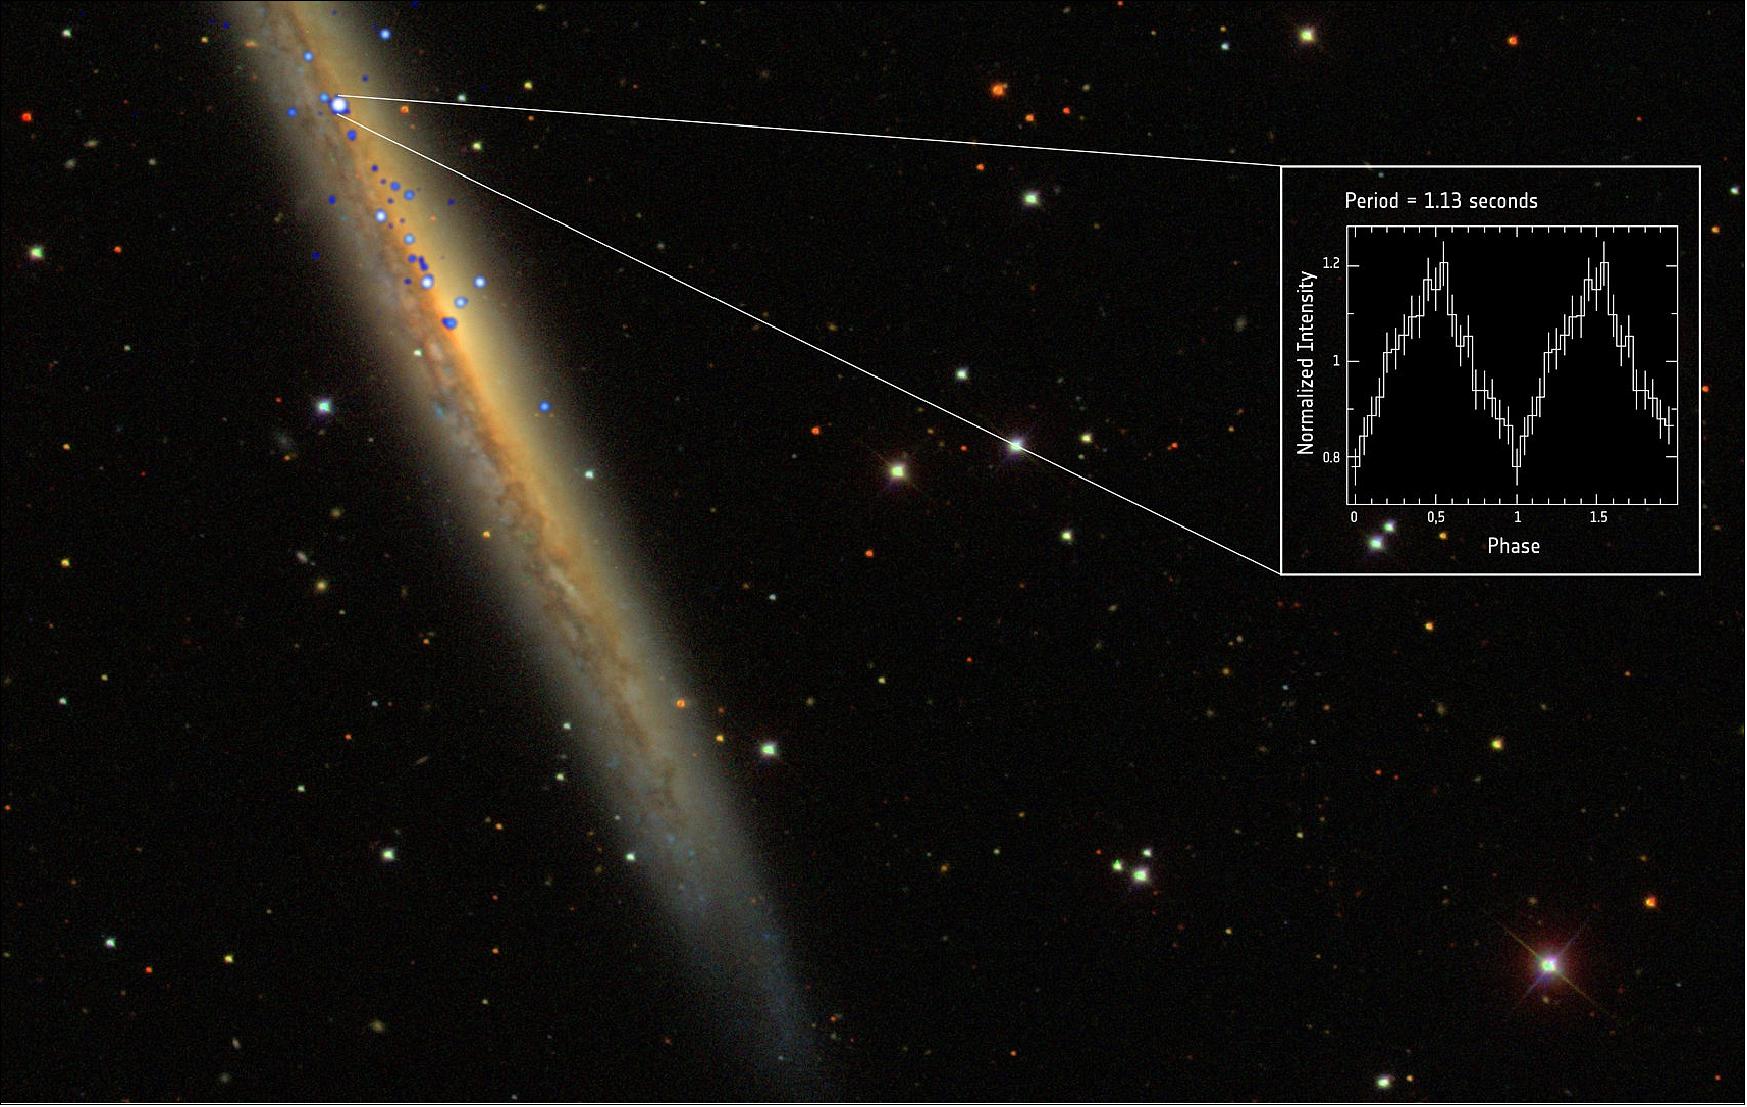 Figure 99: The record-breaking pulsar, identified as NGC 5907 X-1, is in the spiral galaxy NGC 5907, which is also known as the Knife Edge Galaxy or Splinter Galaxy. The image comprises X-ray emission data (blue/white) from ESA’s XMM-Newton space telescope and NASA’s Chandra X-ray observatory, and optical data from the Sloan Digital Sky Survey (galaxy and foreground stars), image credit: ESA/XMM-Newton; NASA/Chandra and SDSS